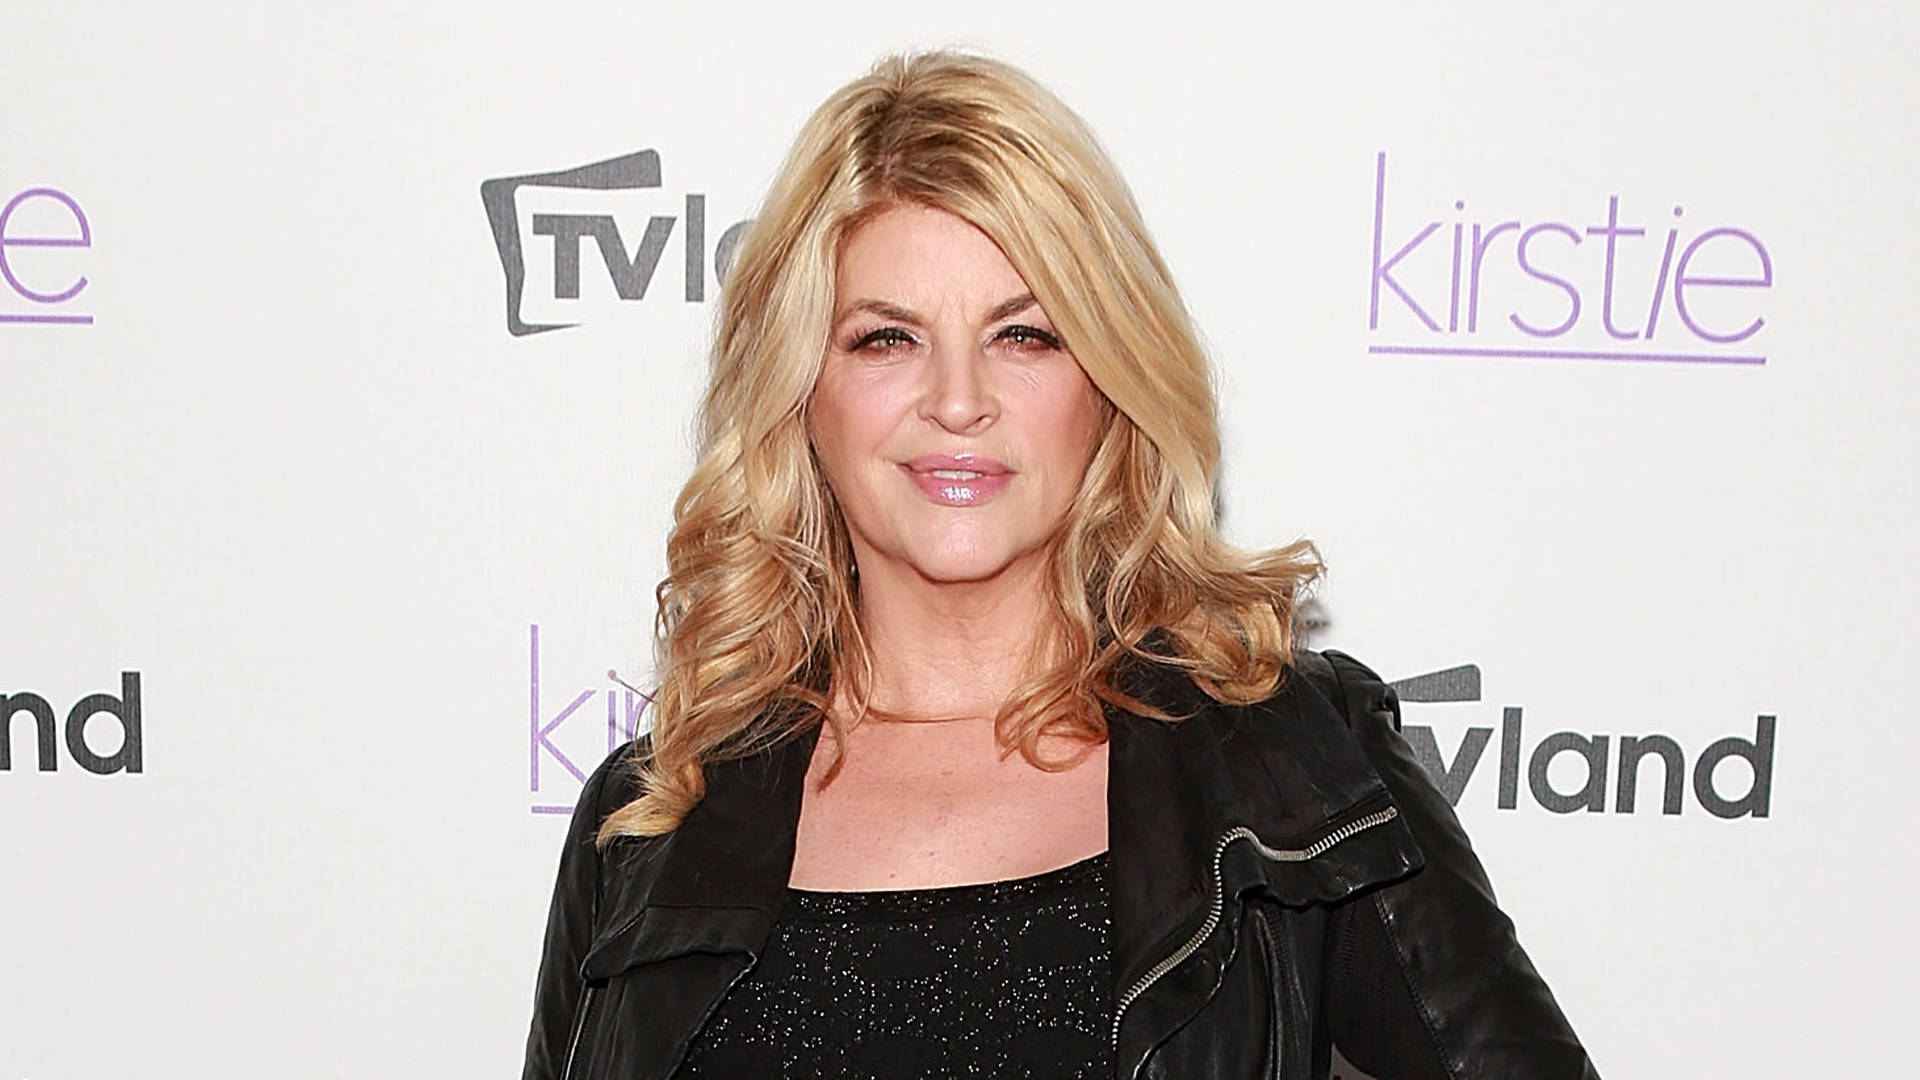 Smuk Kirstie Alley Sitcom Premiere Begivenhed Wallpaper